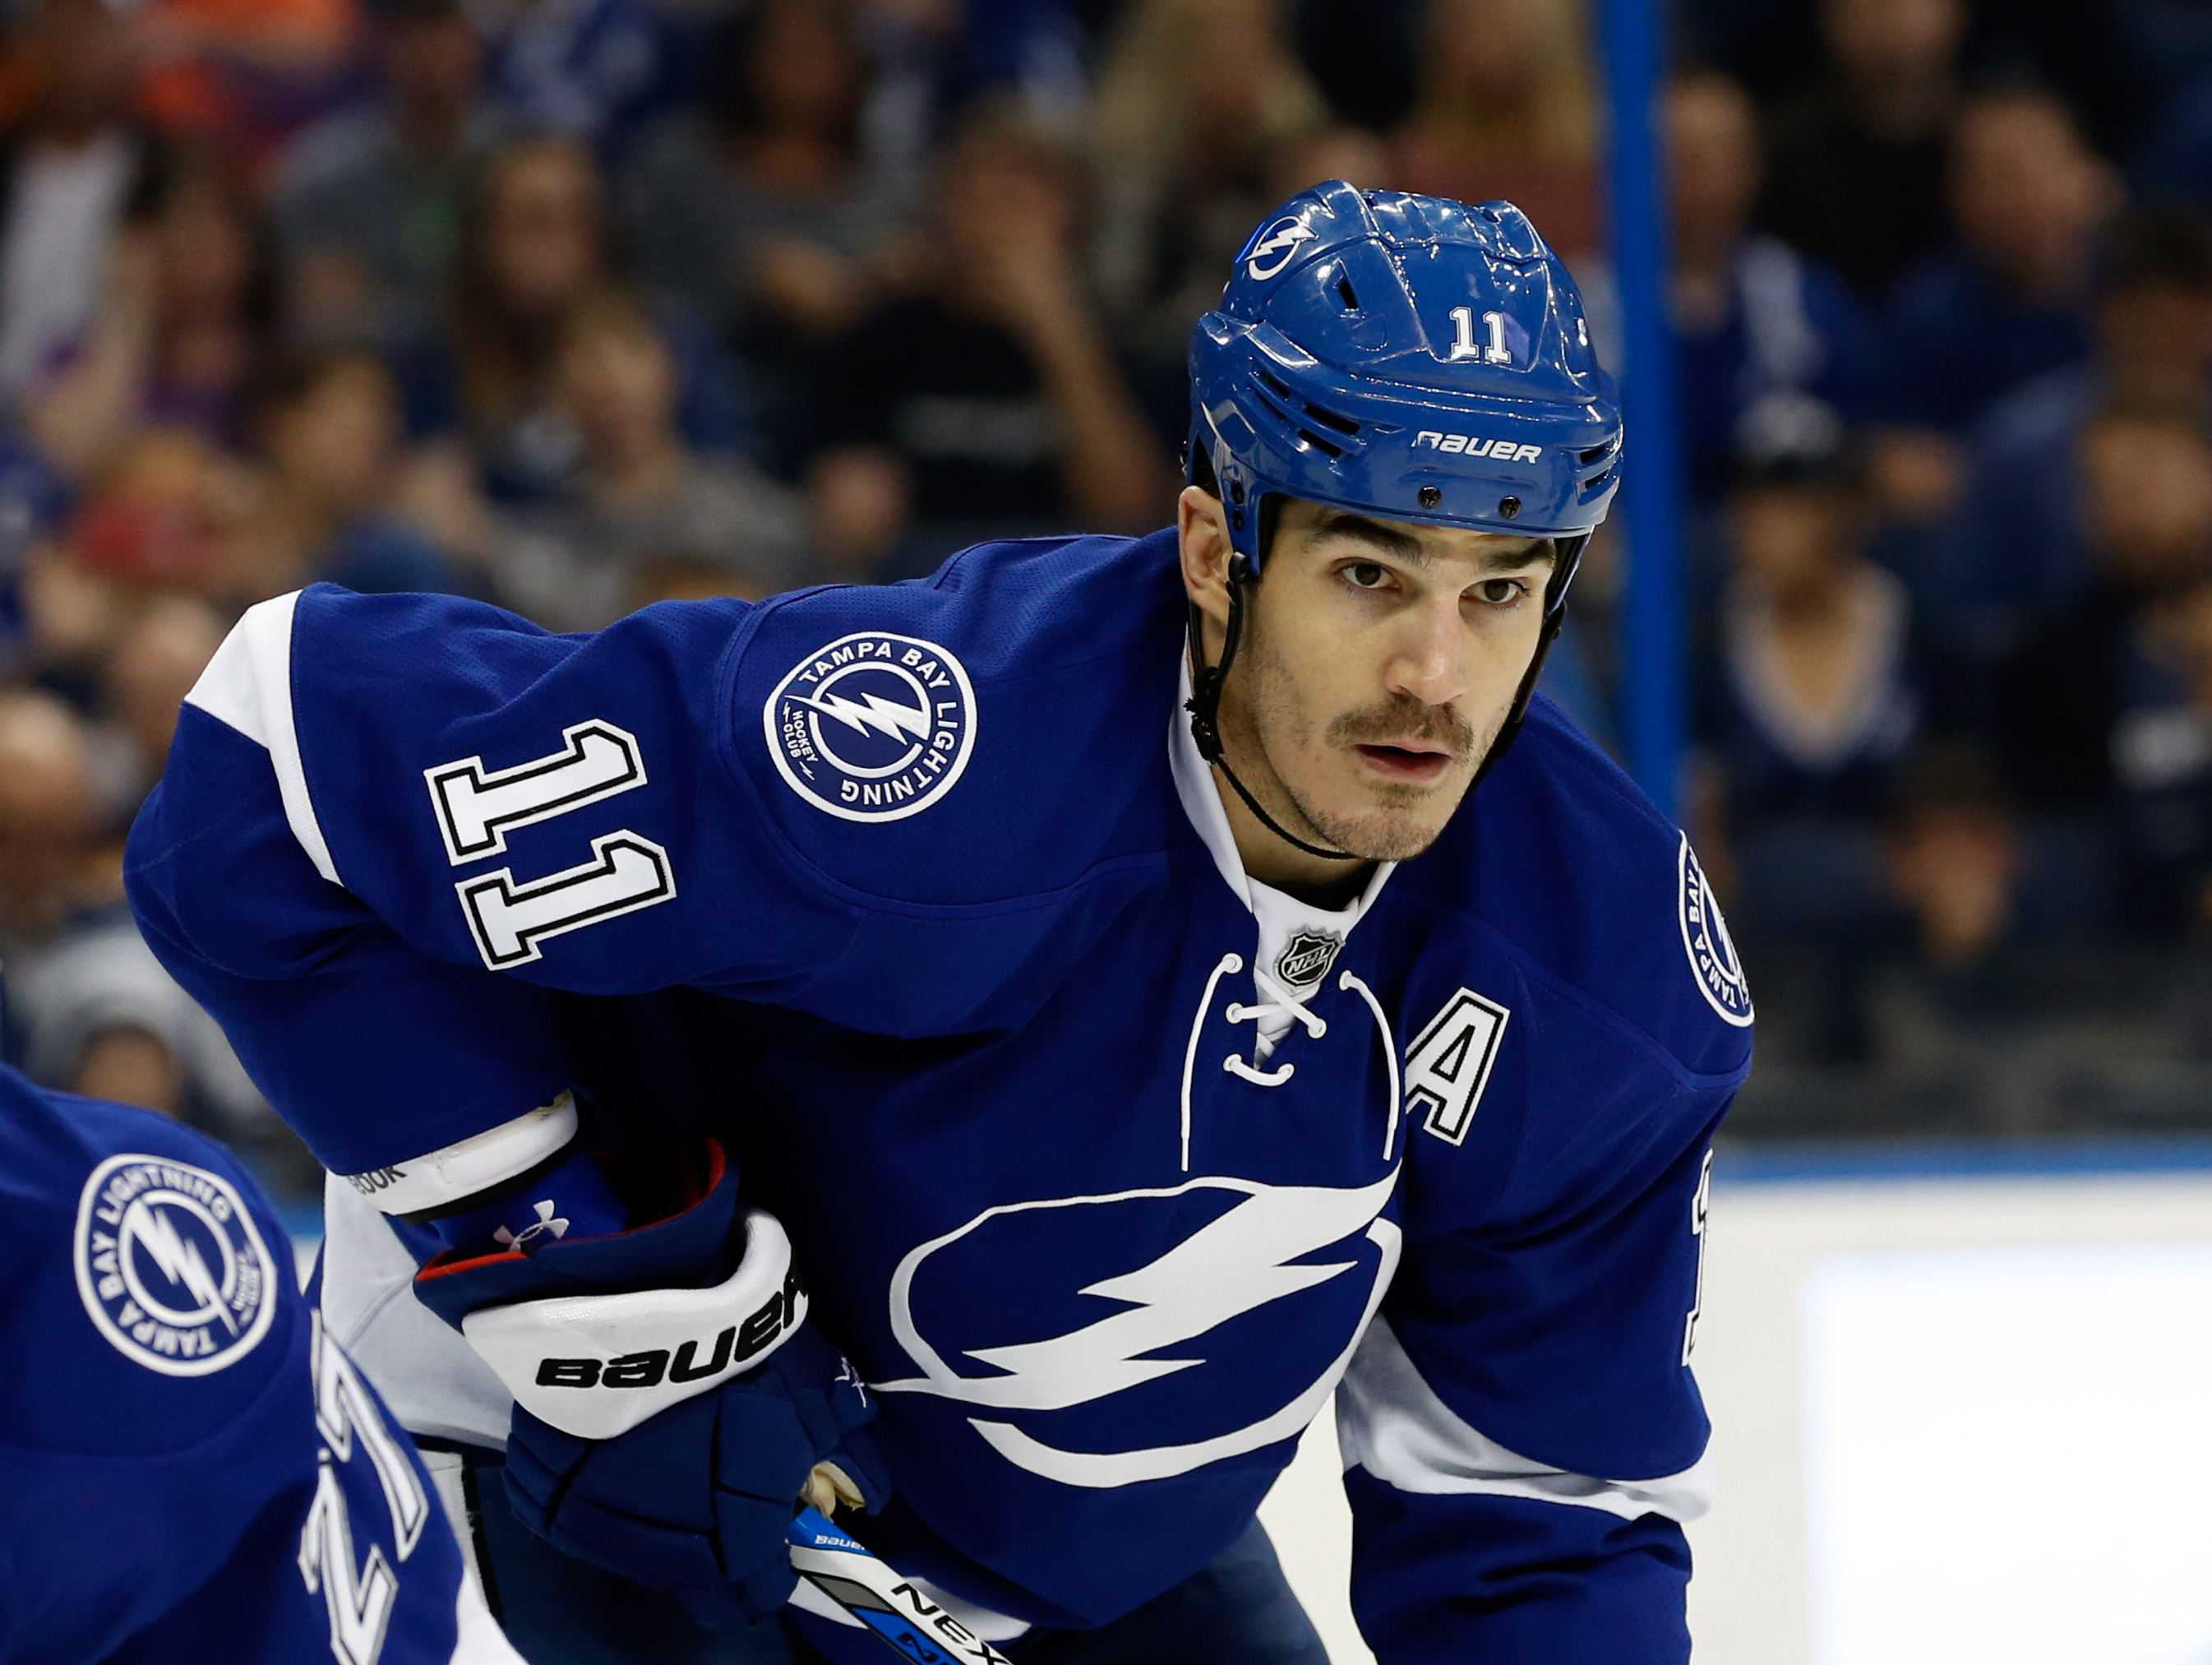 NHL Trade Rumors: Maple Leafs to acquire Brian Boyle from Lightning